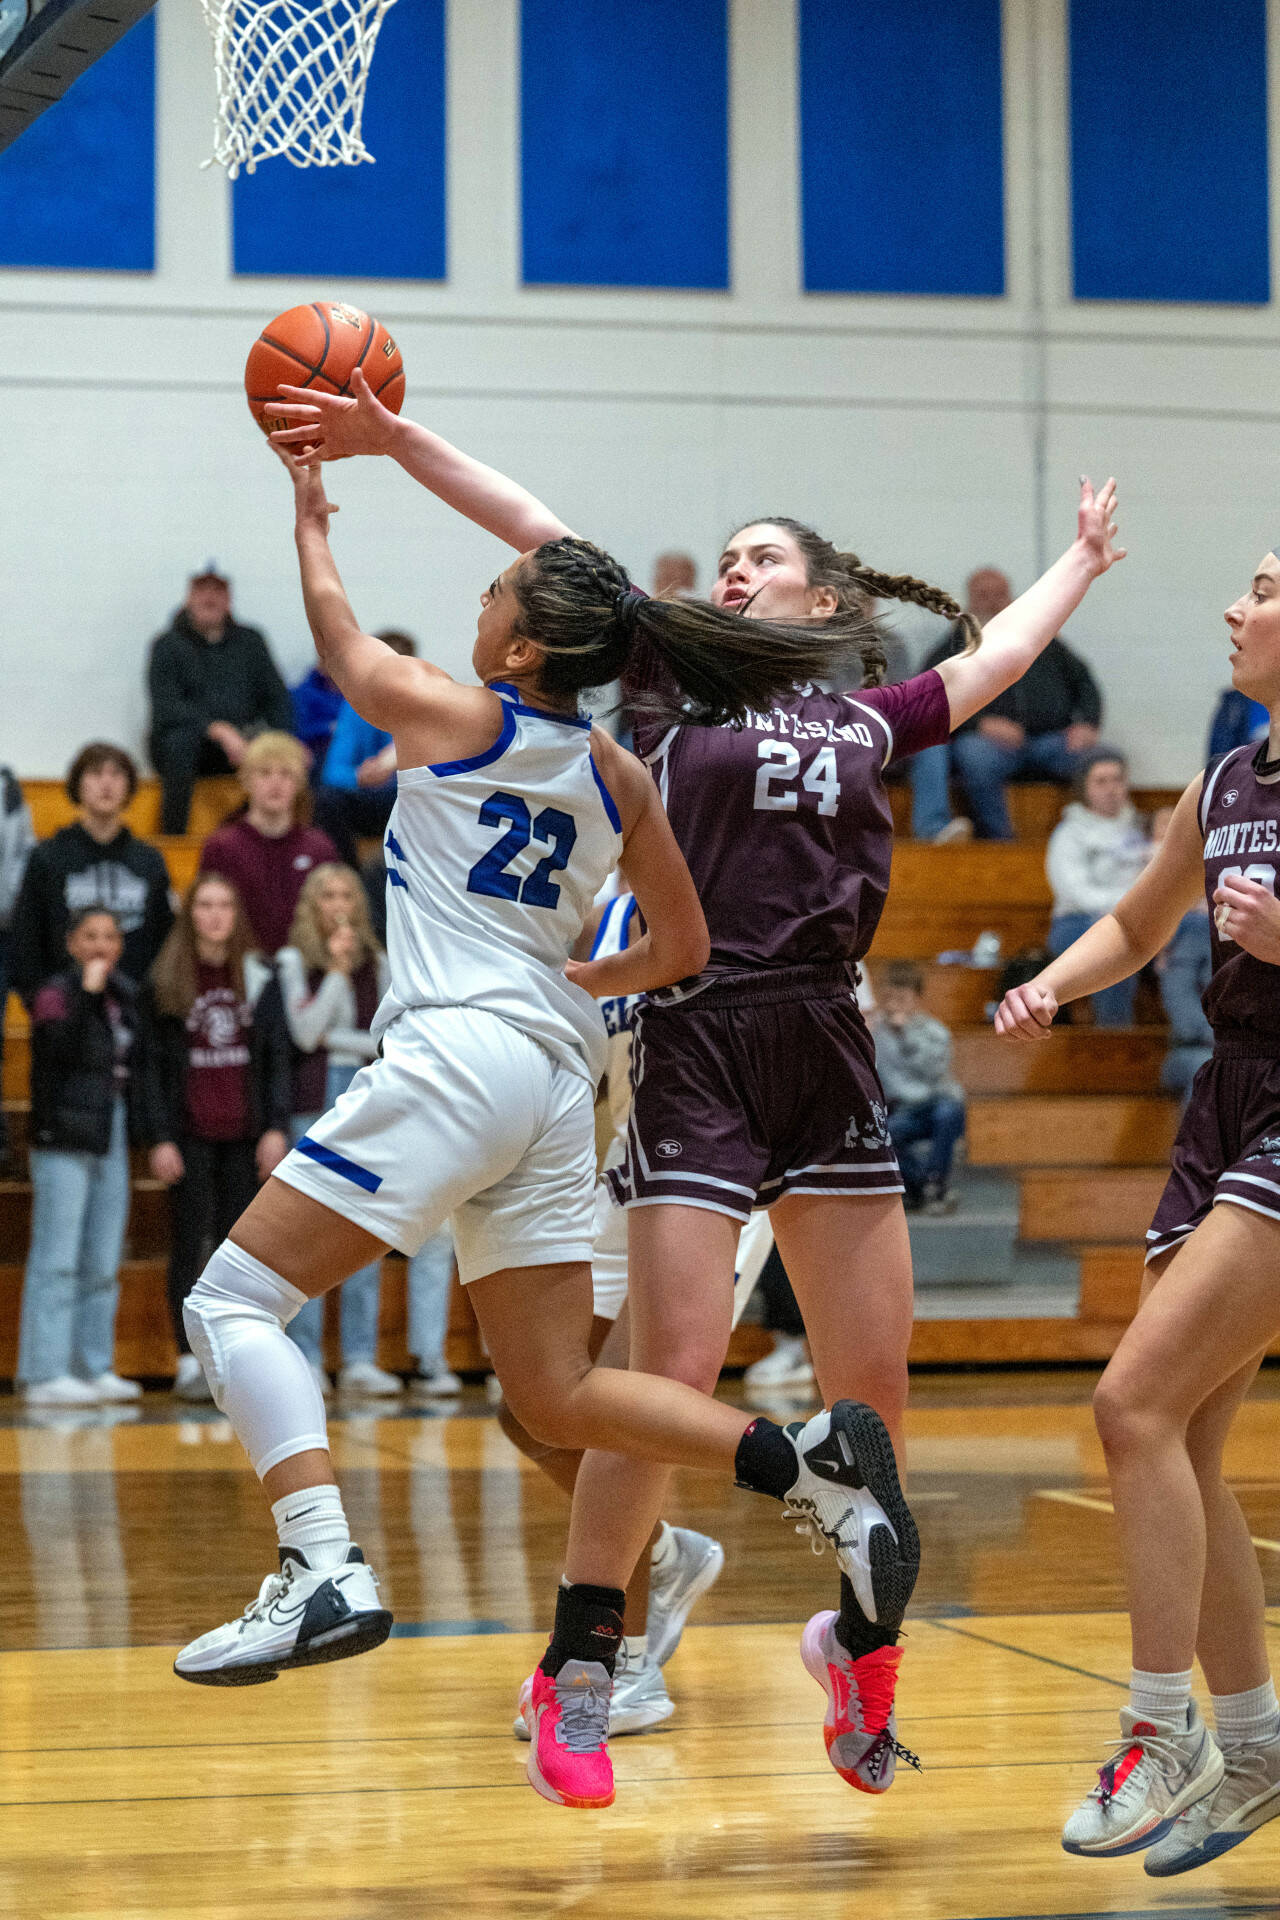 PHOTO BY FOREST WORGUM Montesano’s Jillie Dalan (24) attempts to block the shot of Elma’s Eliza Sibbett during the Bulldogs’ 53-32 win on Wednesday at Elma High School.